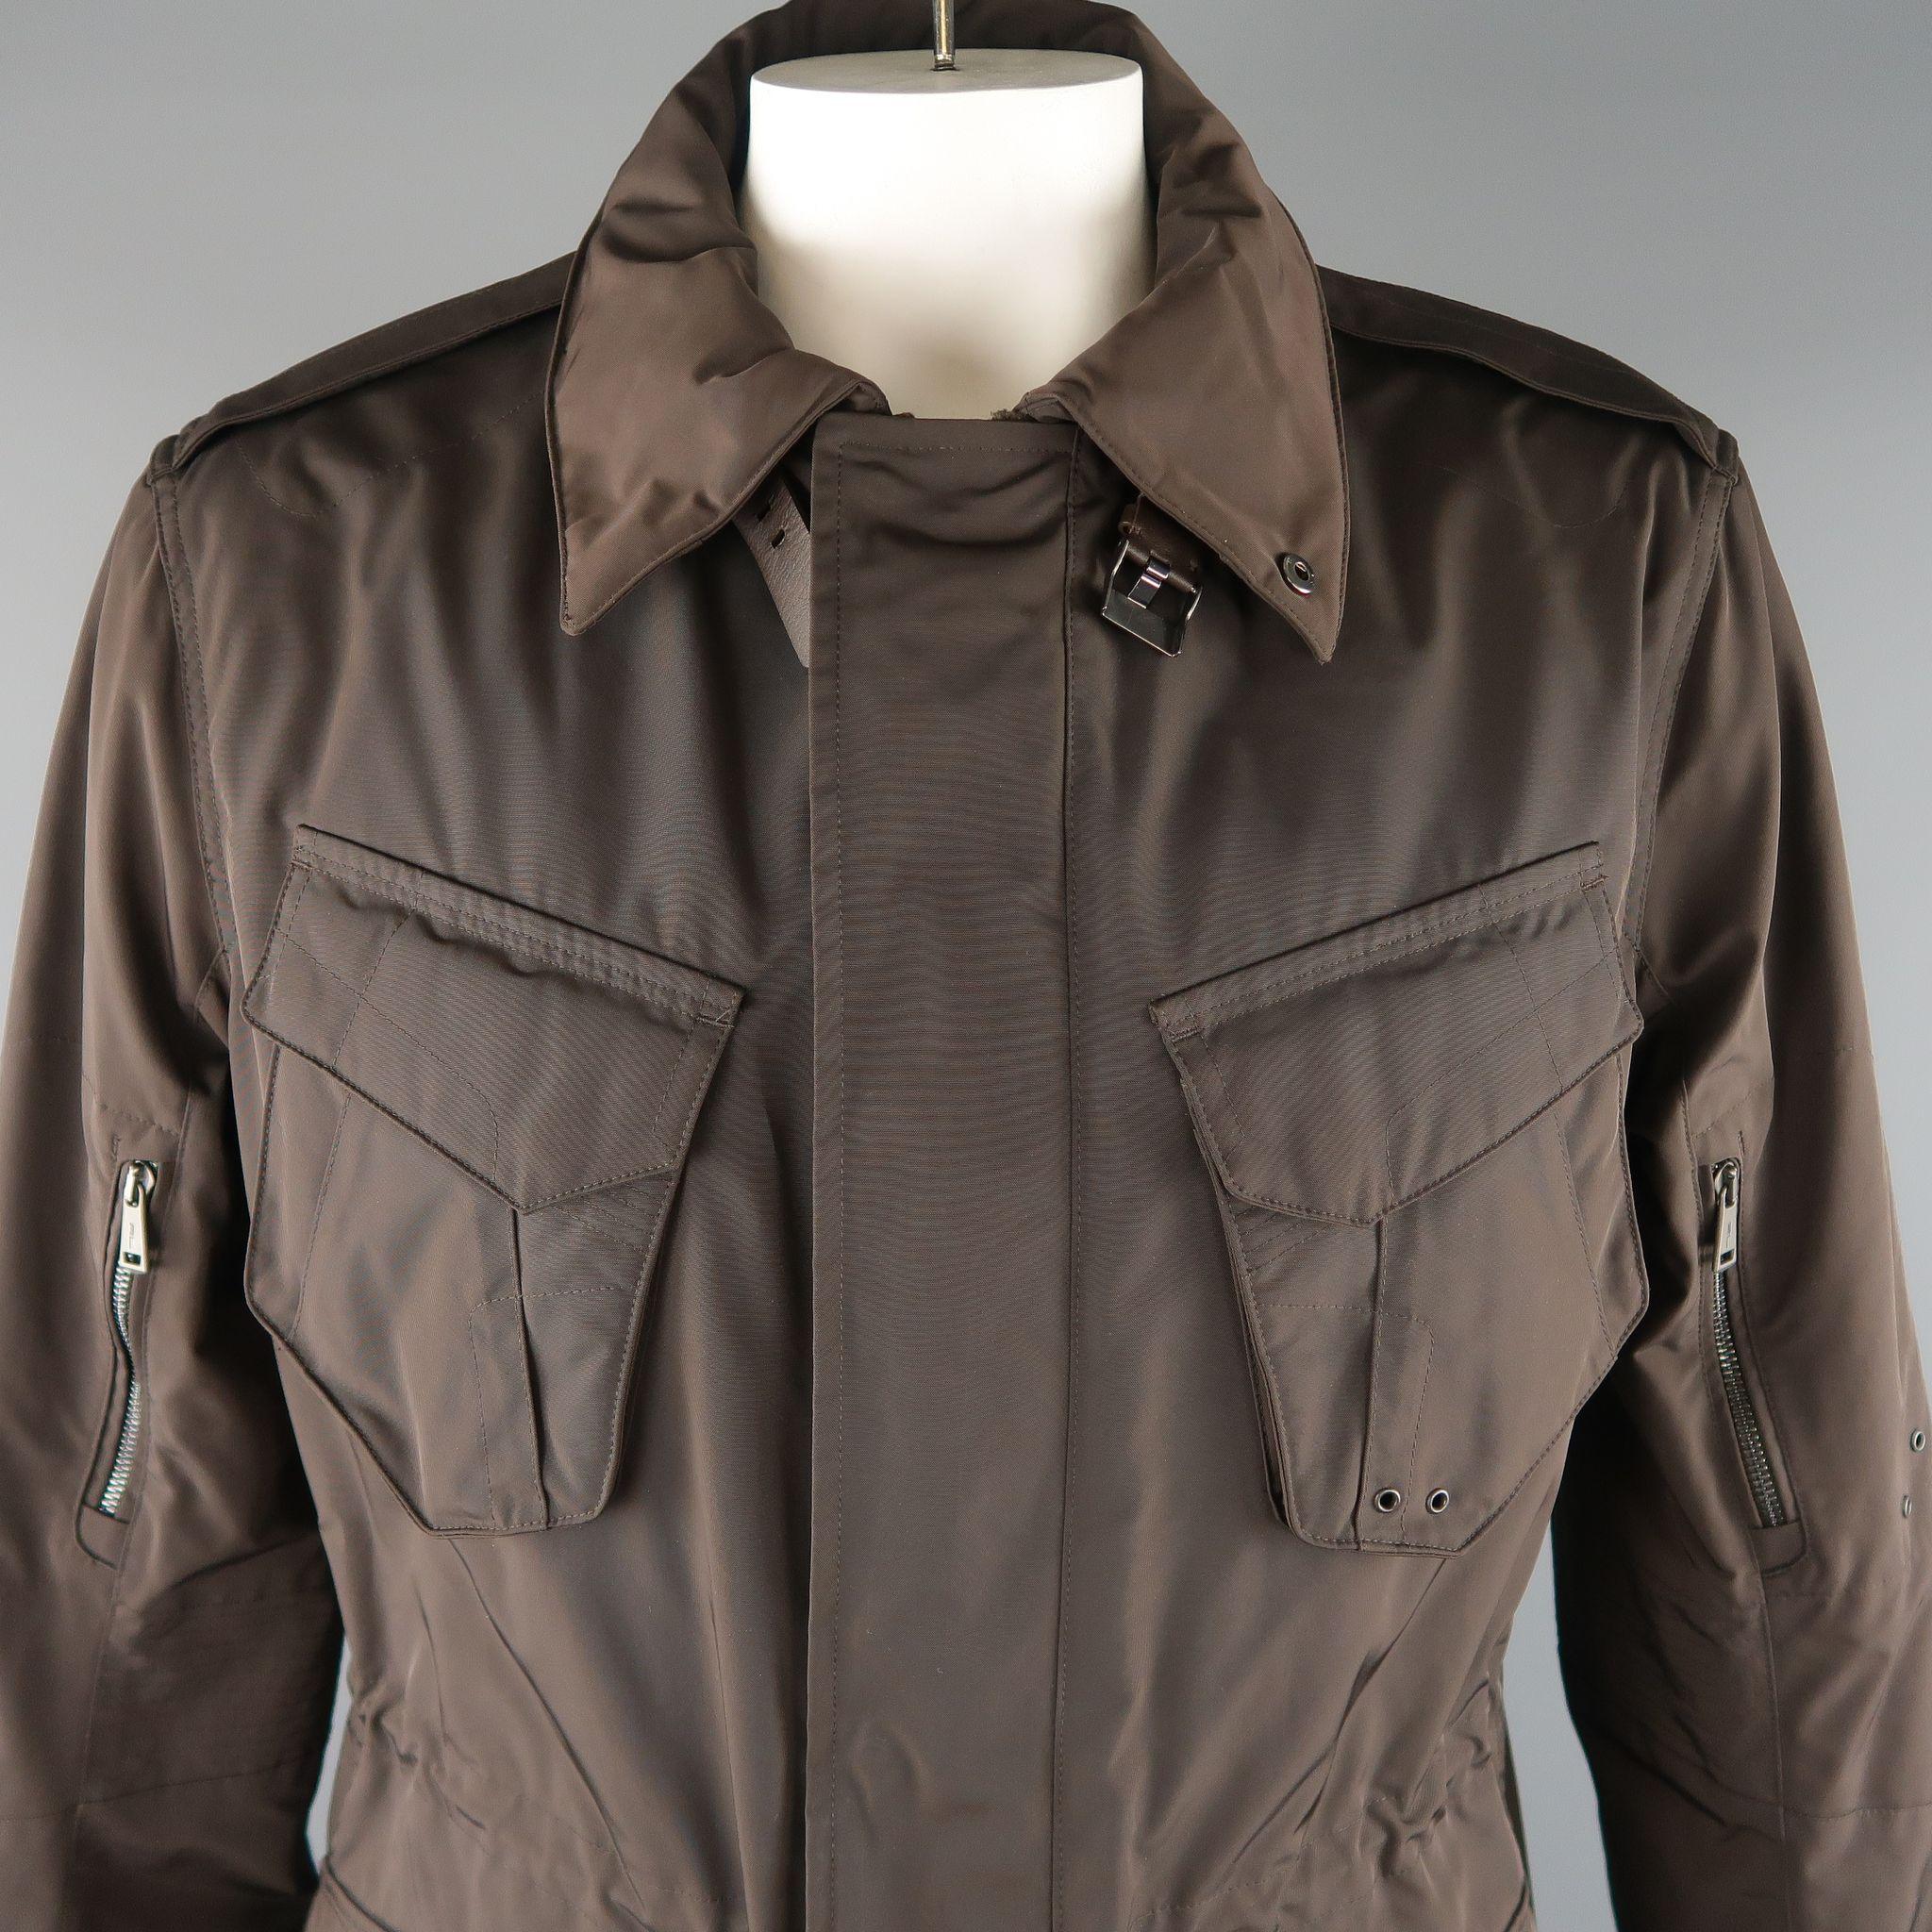 RALPH LAUREN BLACK LABEL  jacket comes in a brown solid polyester material, with patch pockets, zip and snaps and belted cuffs. Made in Italy.
 
Excellent Pre-Owned Condition.
Marked: XL
 
Measurements:
 
Shoulder:  19  in.
Chest: 47  in.
Sleeve: